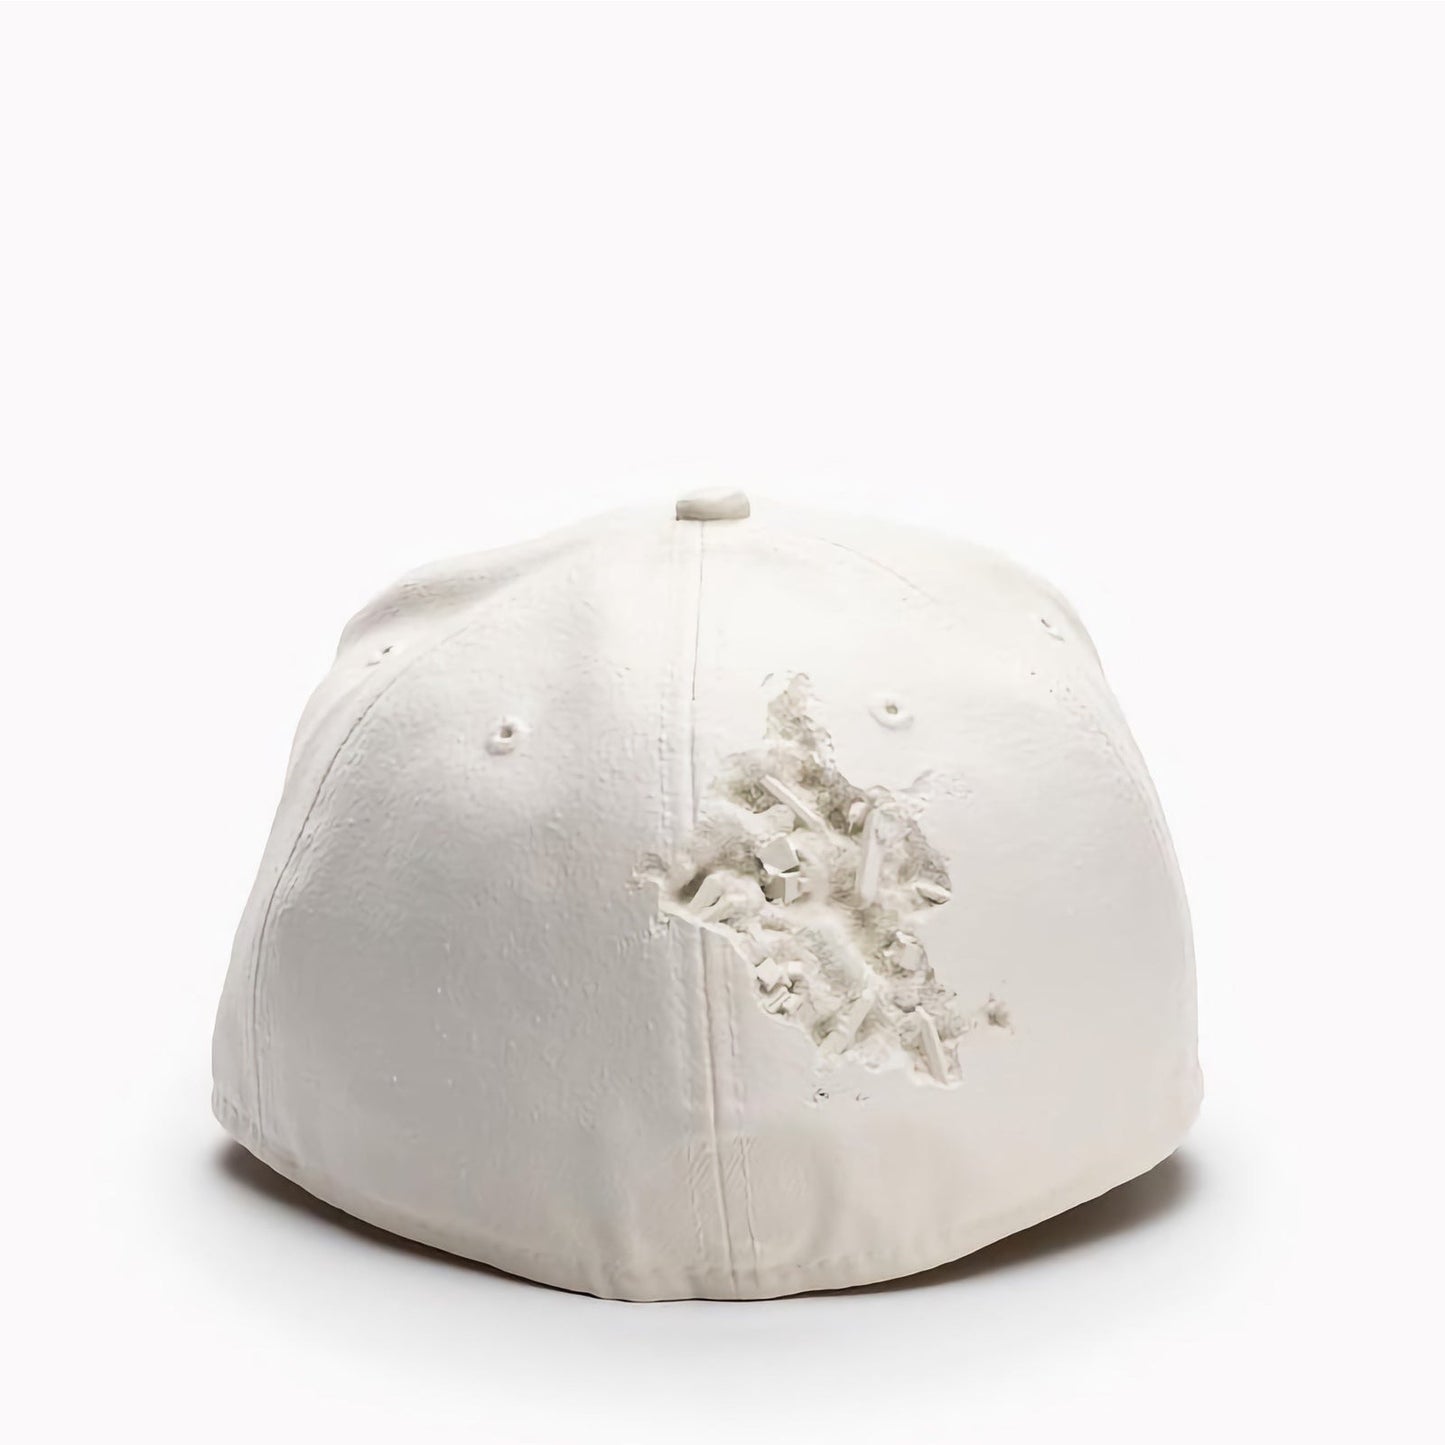 Daniel Arsham x National Gallery of Victoria Modern Artifact 001, 2021 5 x 7.67 x 7.67 in / 2.87 lbs Edition of 500  In celebration of NGV Triennial 2020, the NGV has collaborated with artist Daniel Arsham on a limited-edition exclusive to the NGV design store.